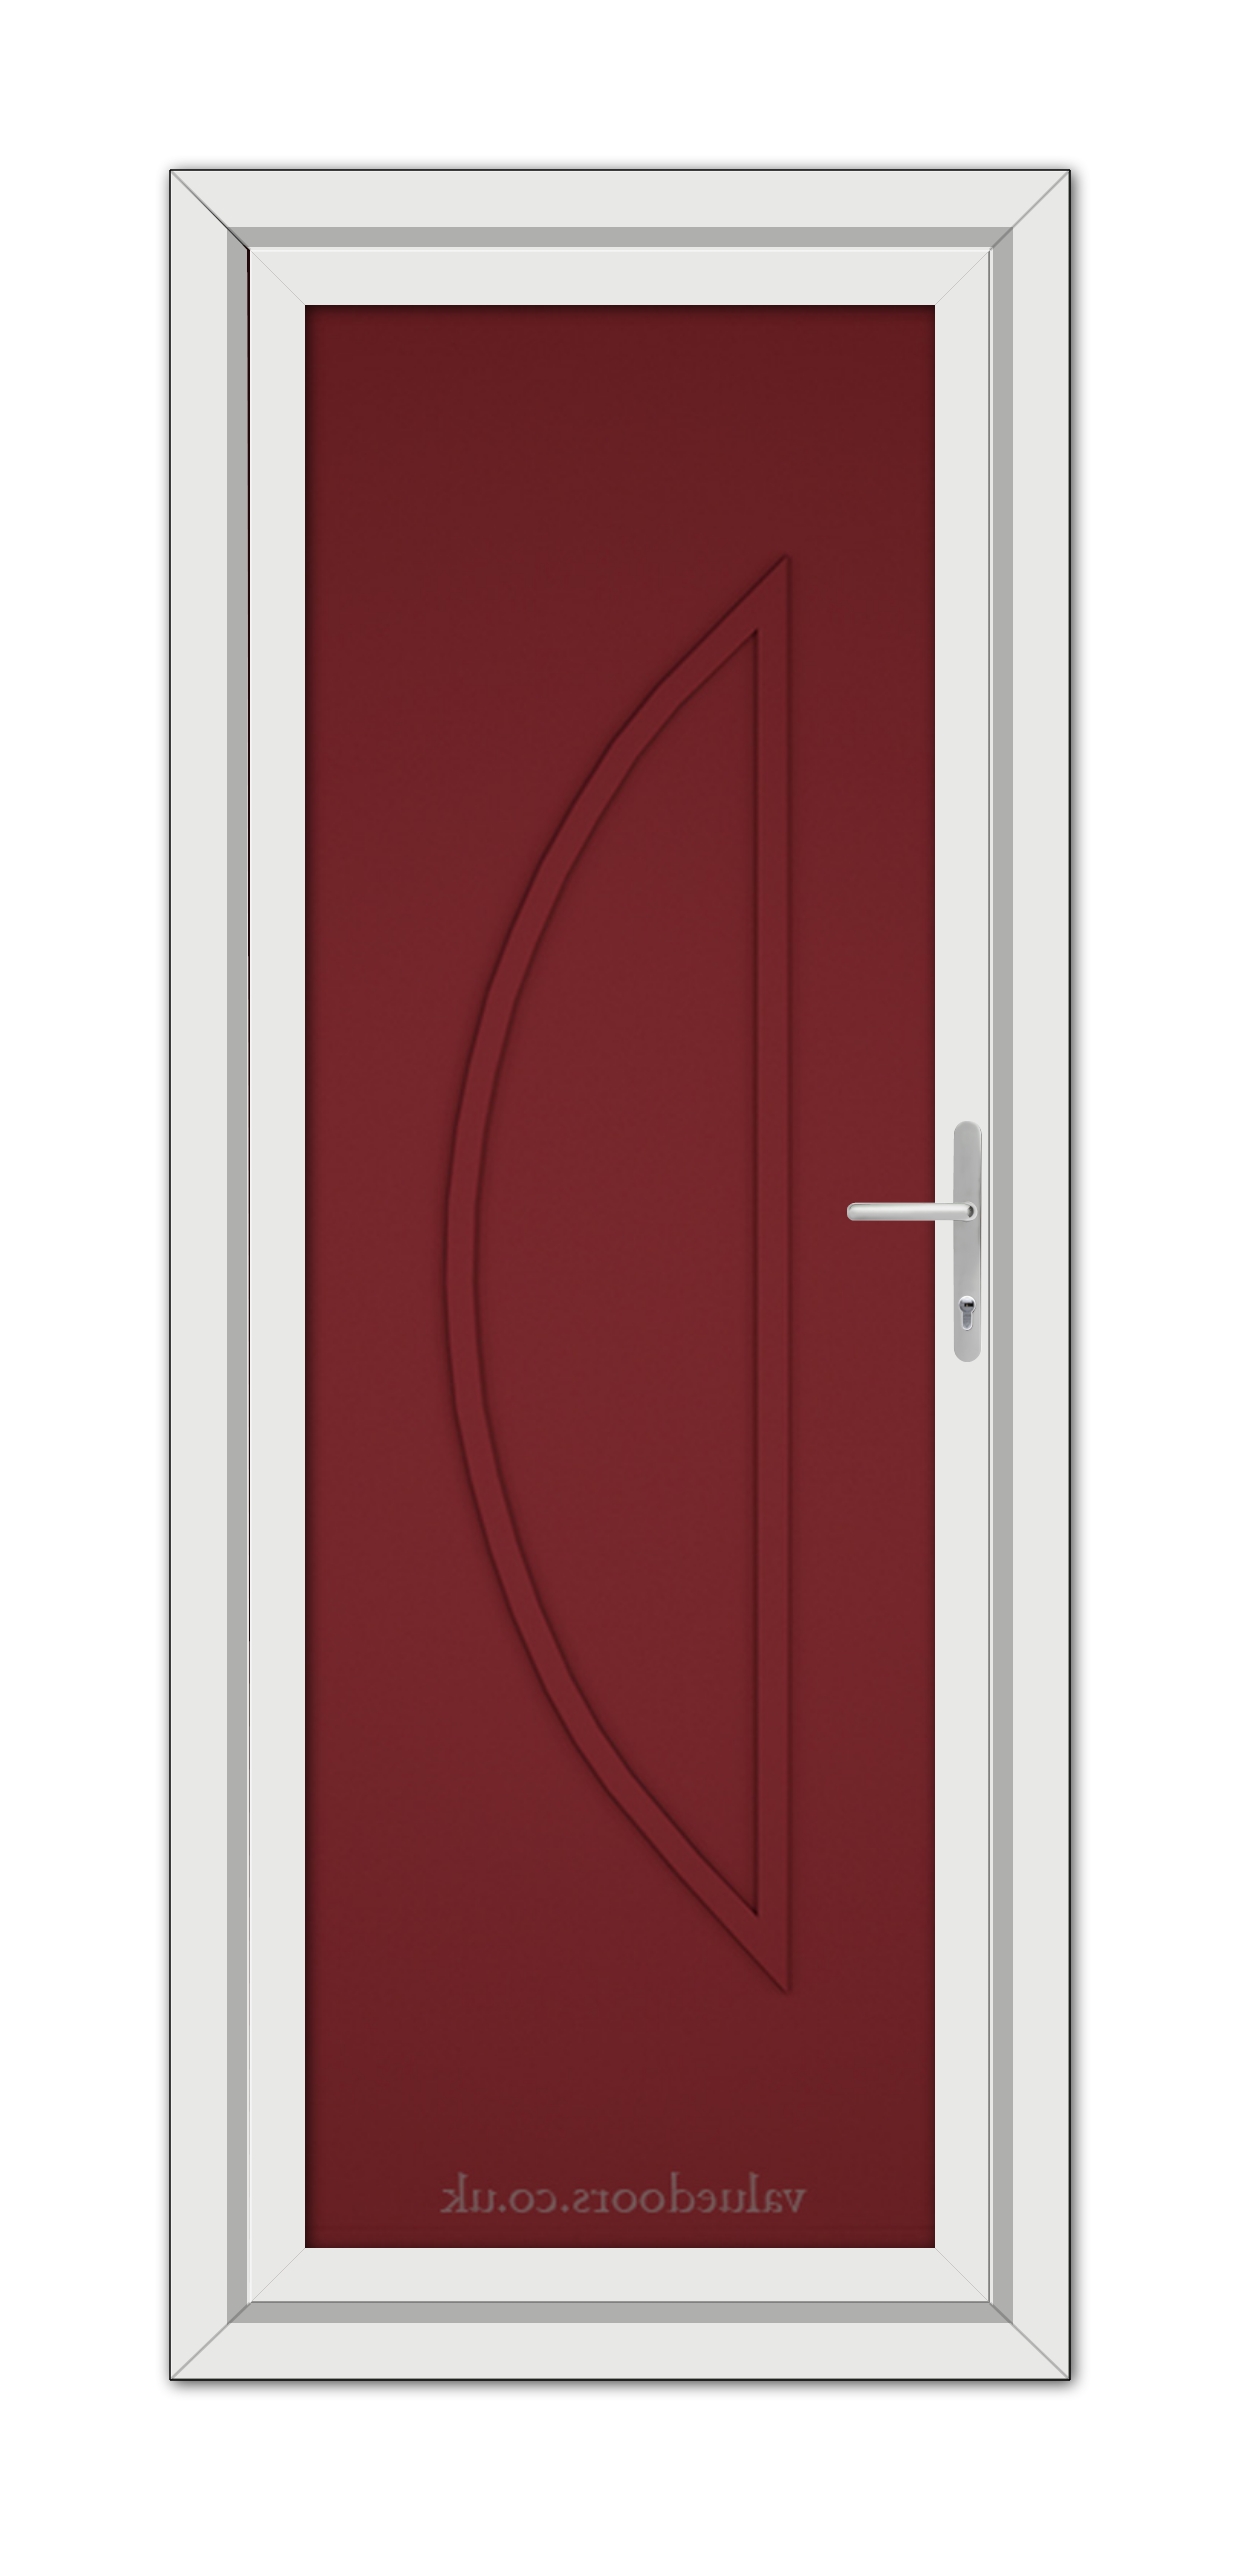 An upright image of a Red Modern 5051 Solid uPVC Door embedded in a white frame, featuring a sleek silver handle on the right side.